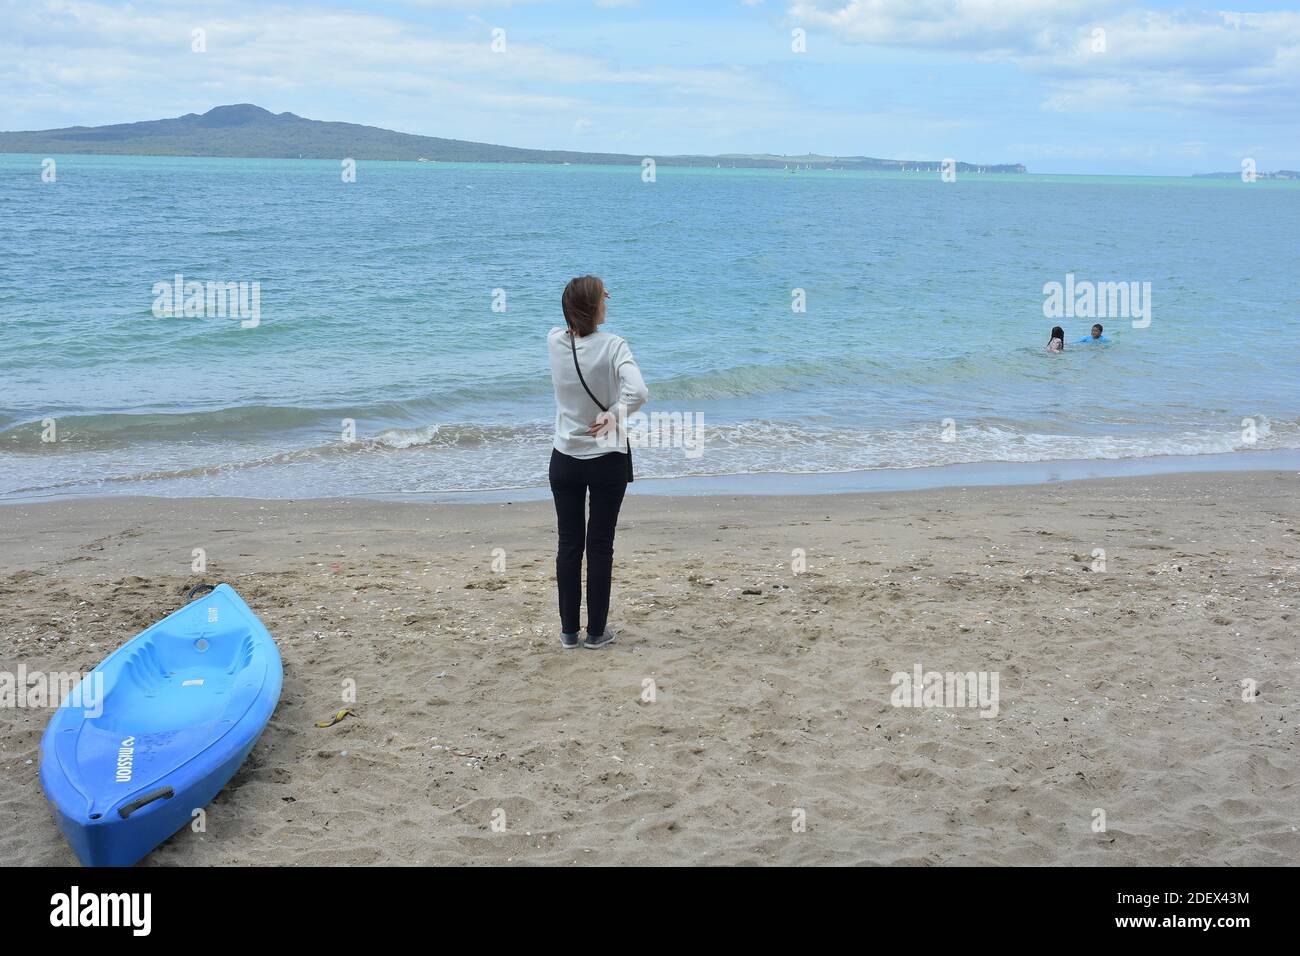 AUCKLAND, NEW ZEALAND - Nov 21, 2020: View of woman standing and watching swimming kids at Mission Bay beach with Rangitoto Island in background and b Stock Photo